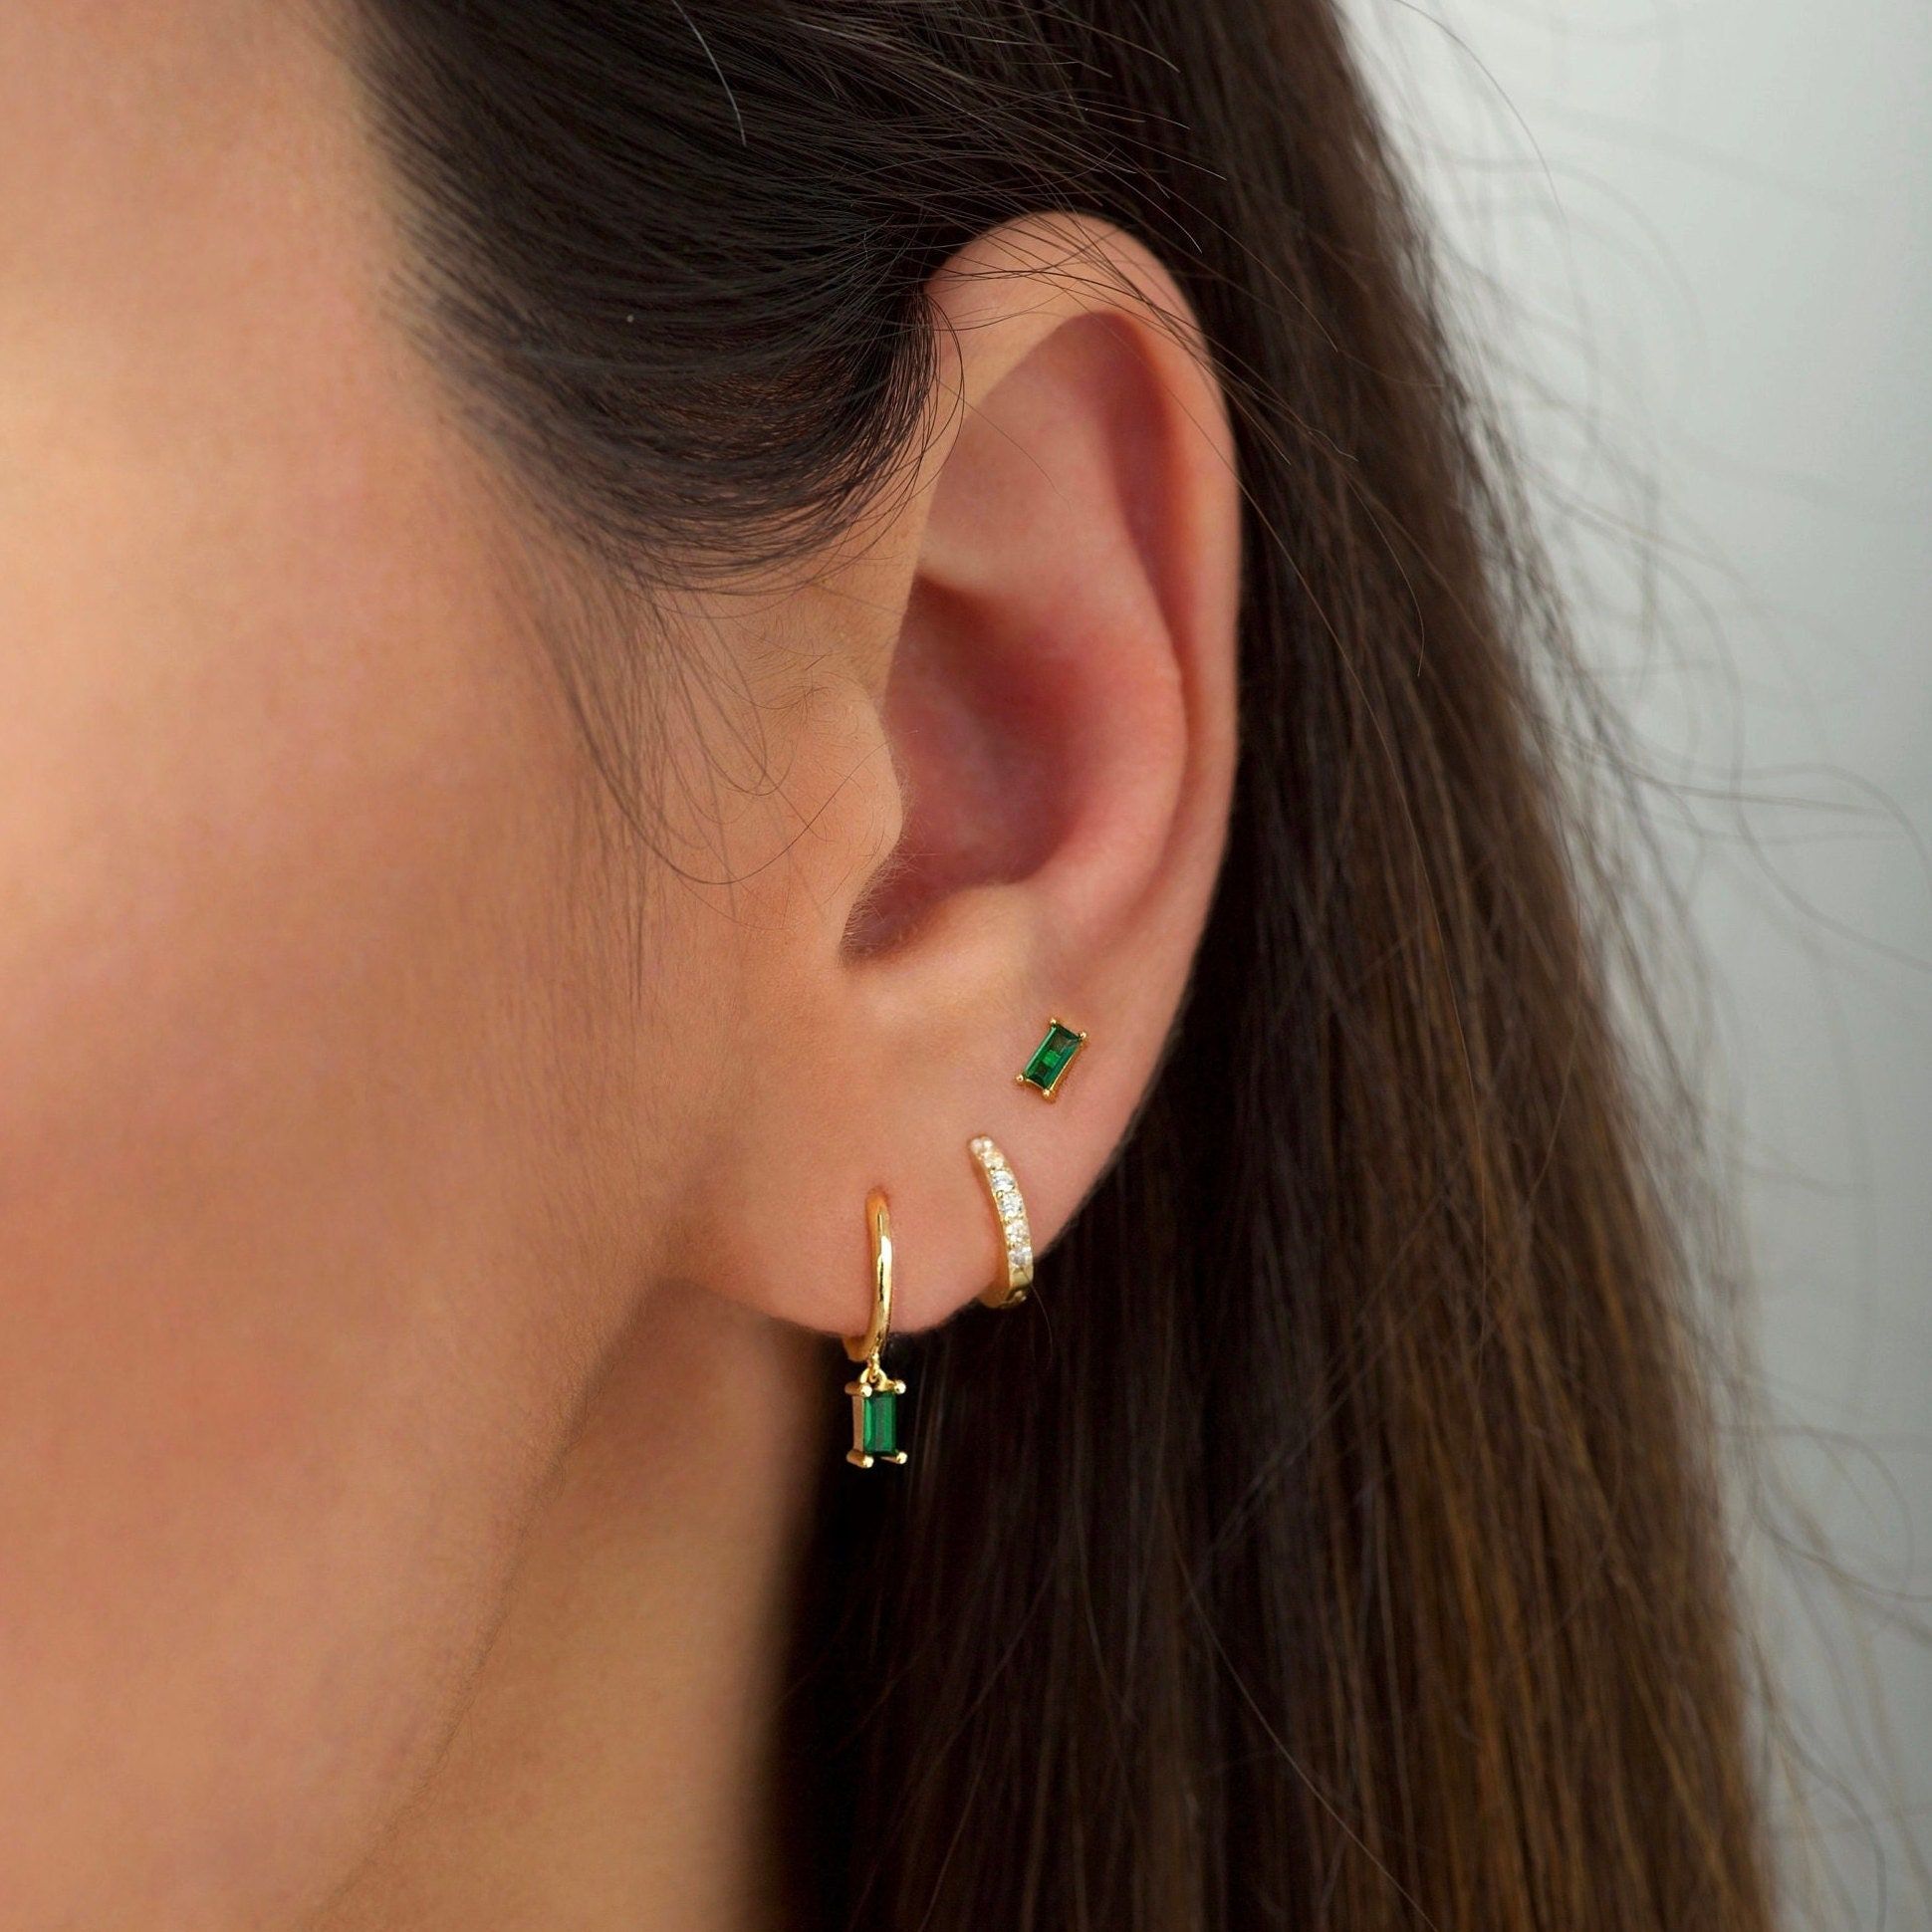 Choose Emerald earrings for making stylish personality